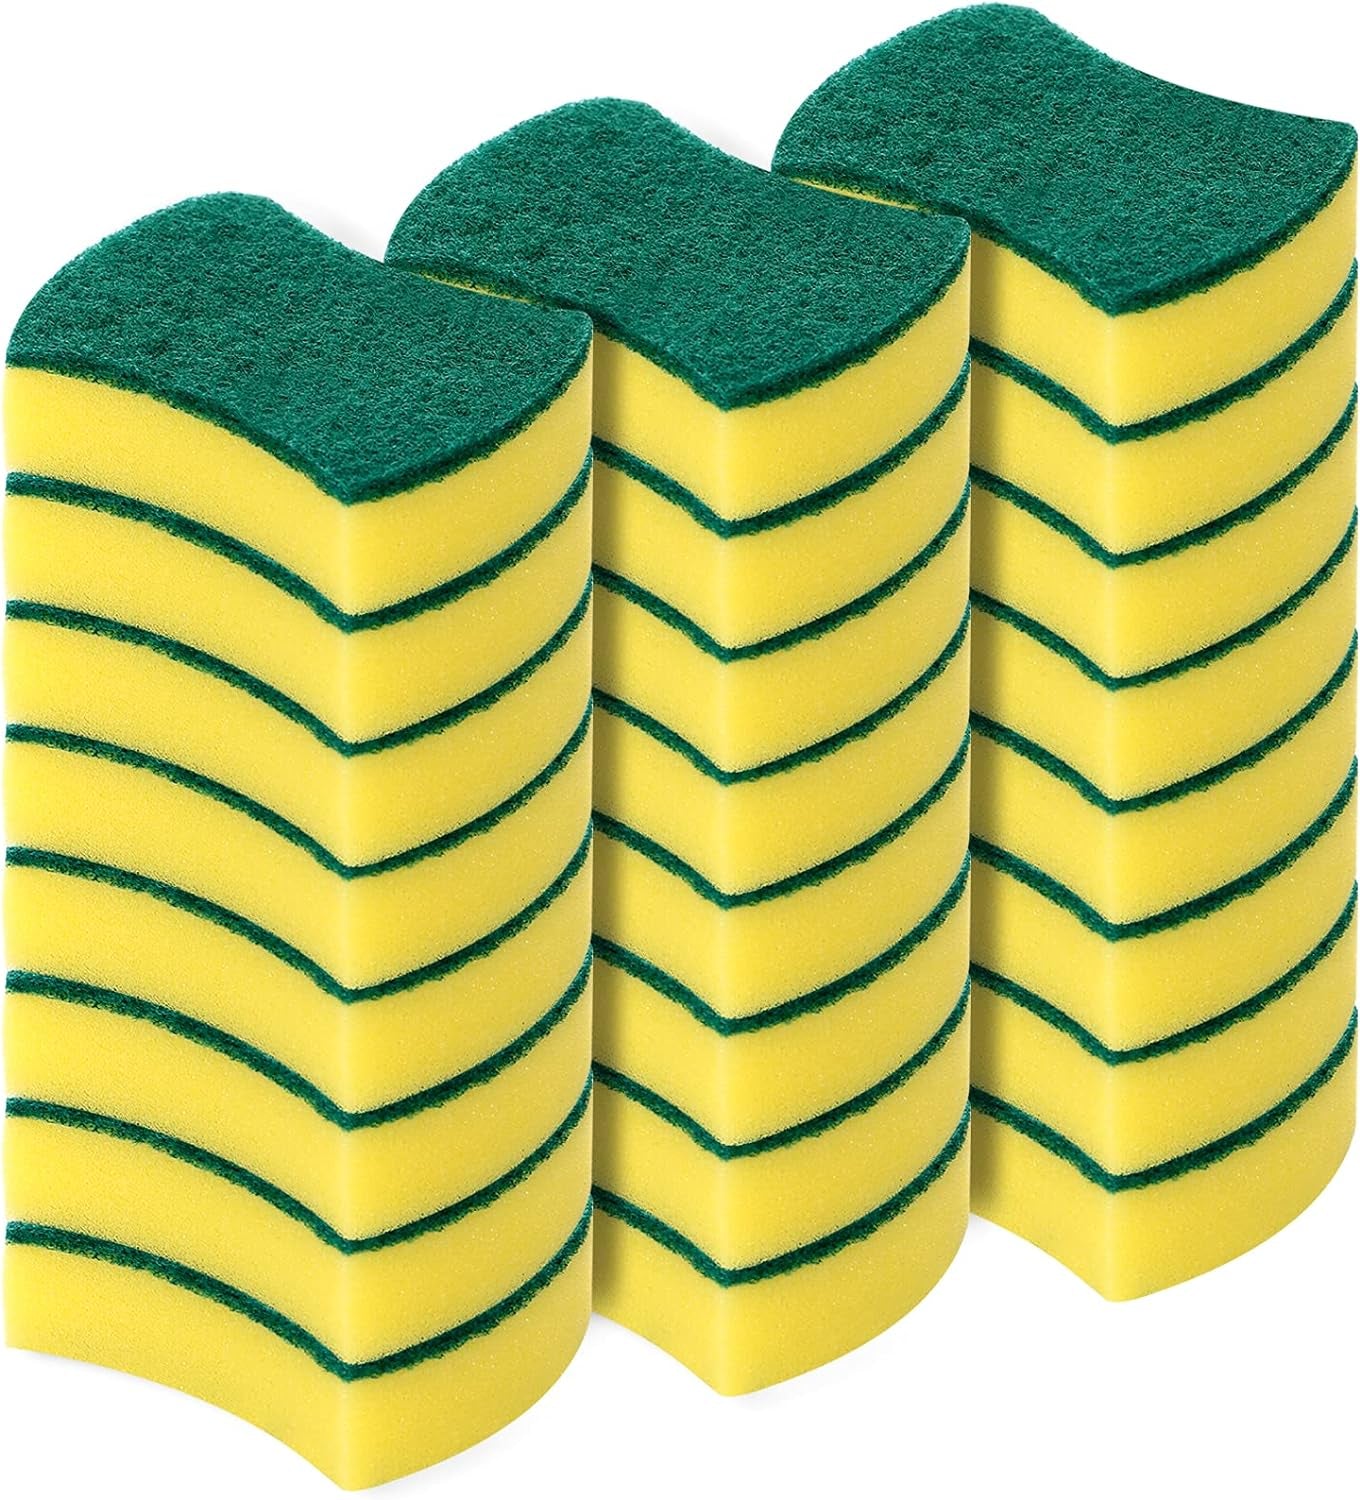 Kitchen Cleaning Sponges,Eco Non-Scratch for Dish,Scrub Sponges(Pack of 24)